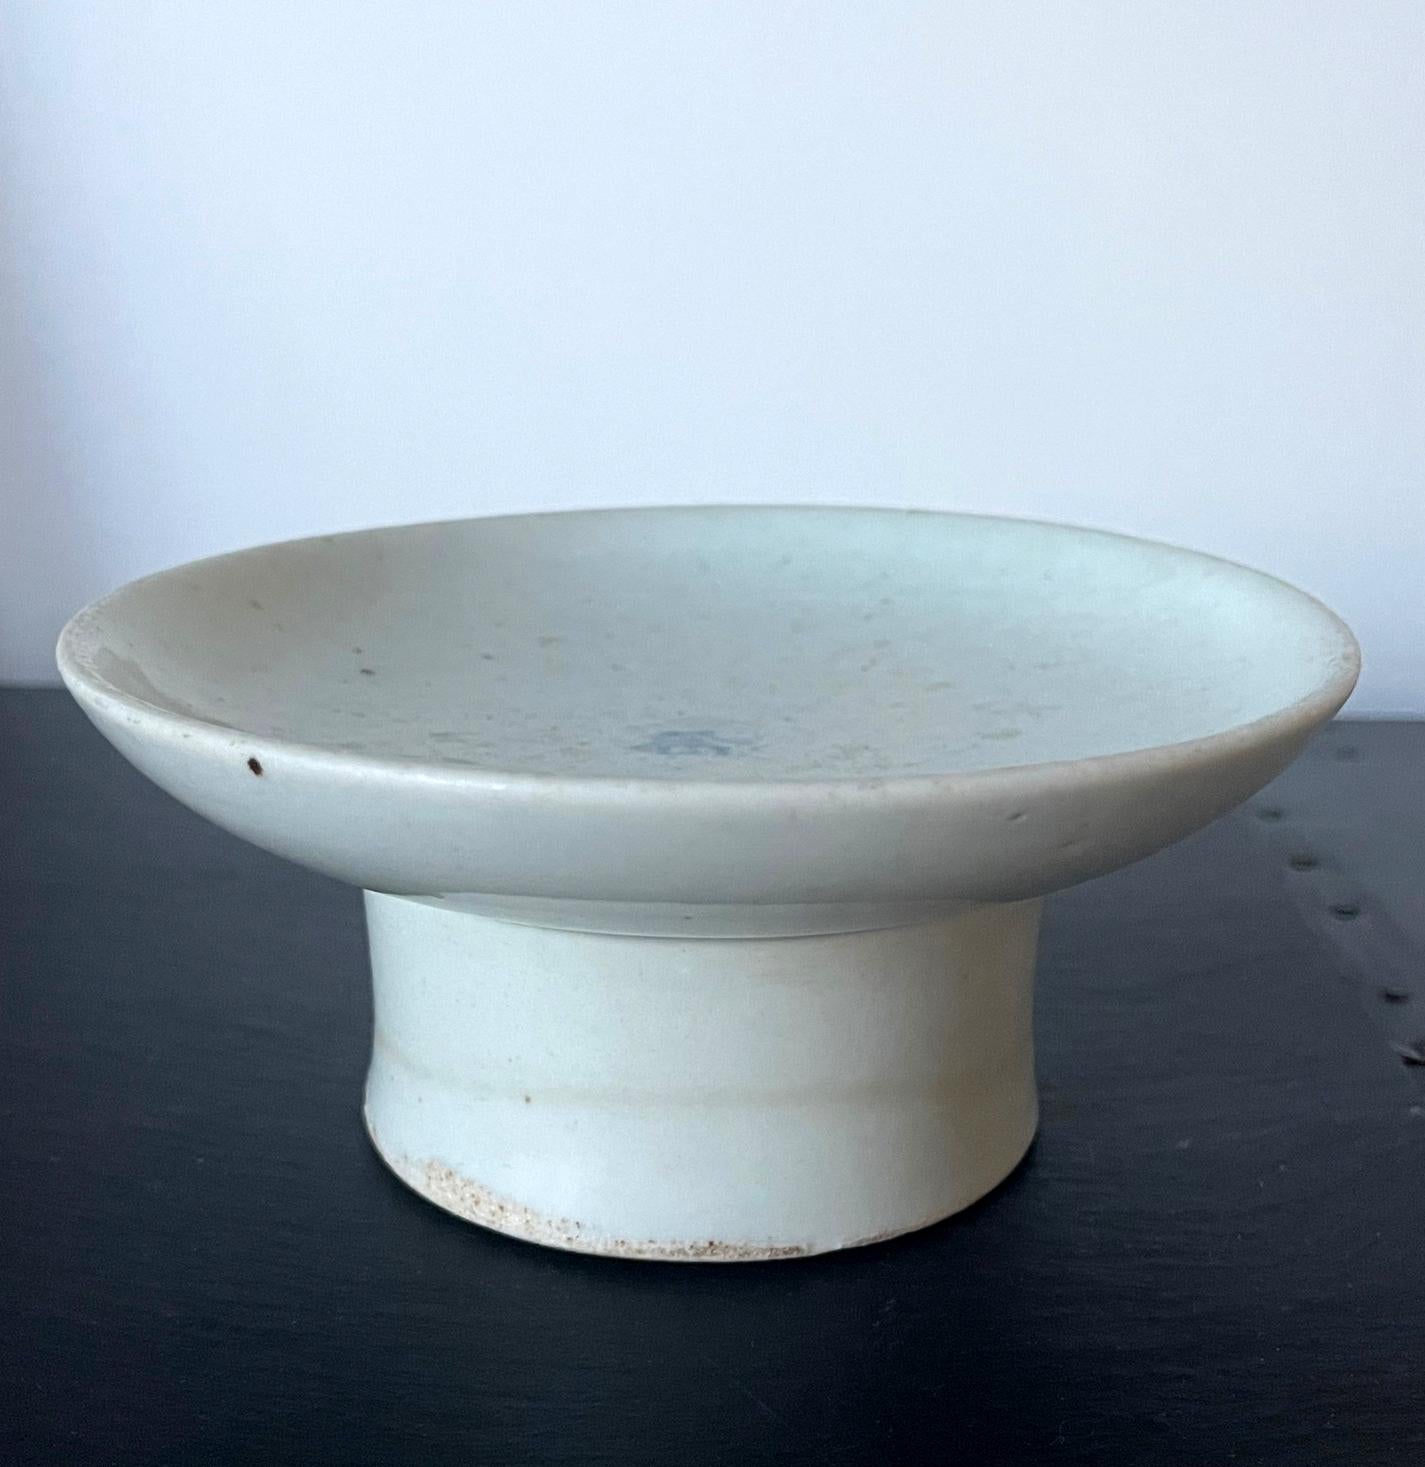 A small ceramic stemmed dish with high cylindrical foot in white glaze with a cobalt blue underglaze inscription in the center from Korea, circa 18-19th century Joseon Dynasty. This is a classic ceremonial vessel that was used to offer the sweet